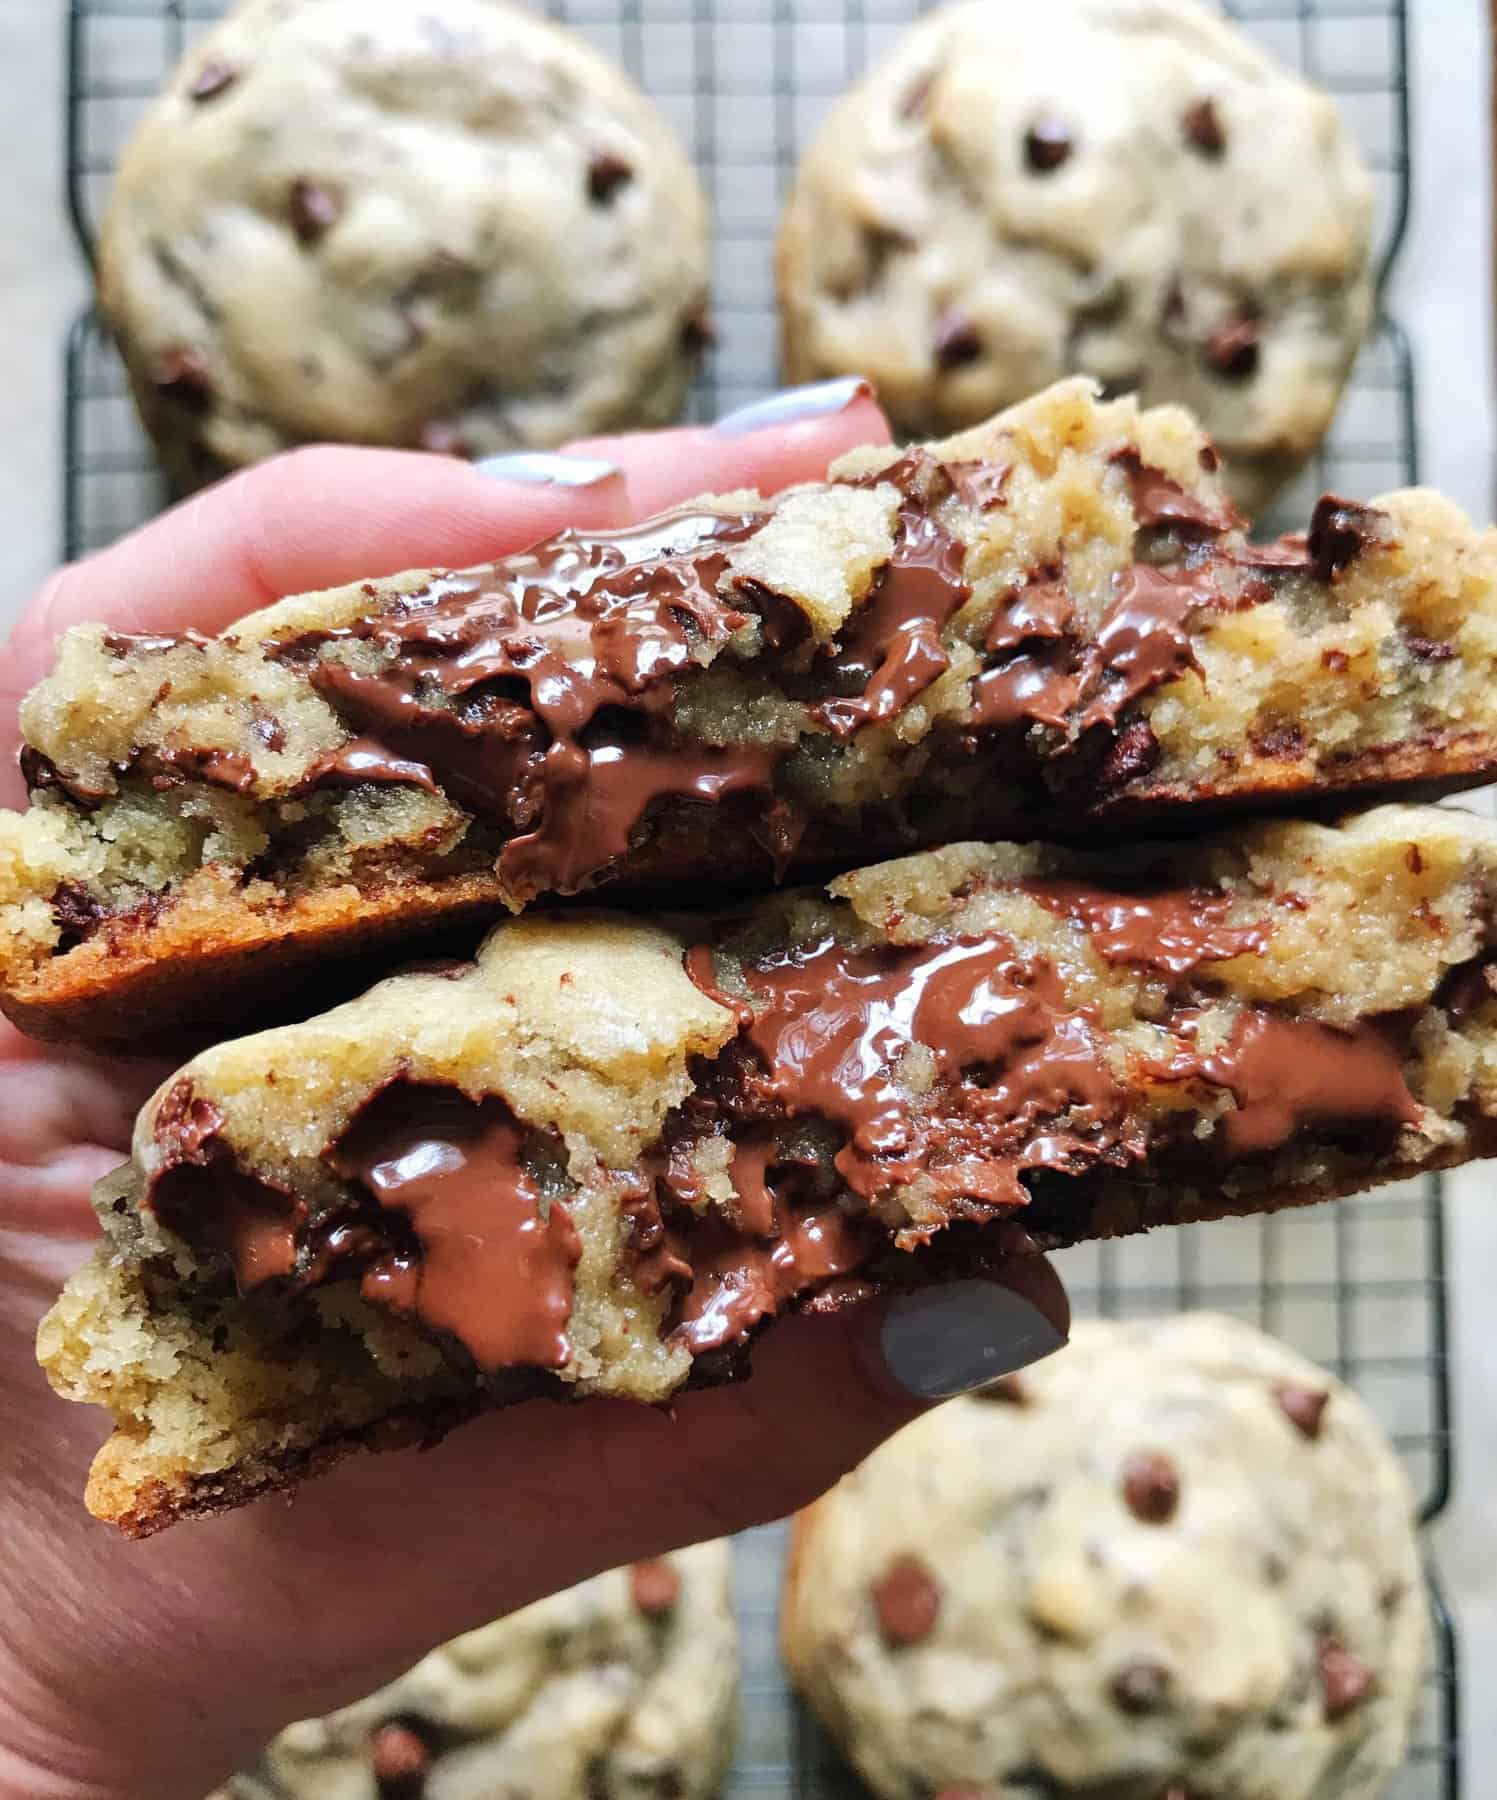 Two Gooey Chocolate Chip Cookies Being Held Above More Cookies on a Cooling Rack